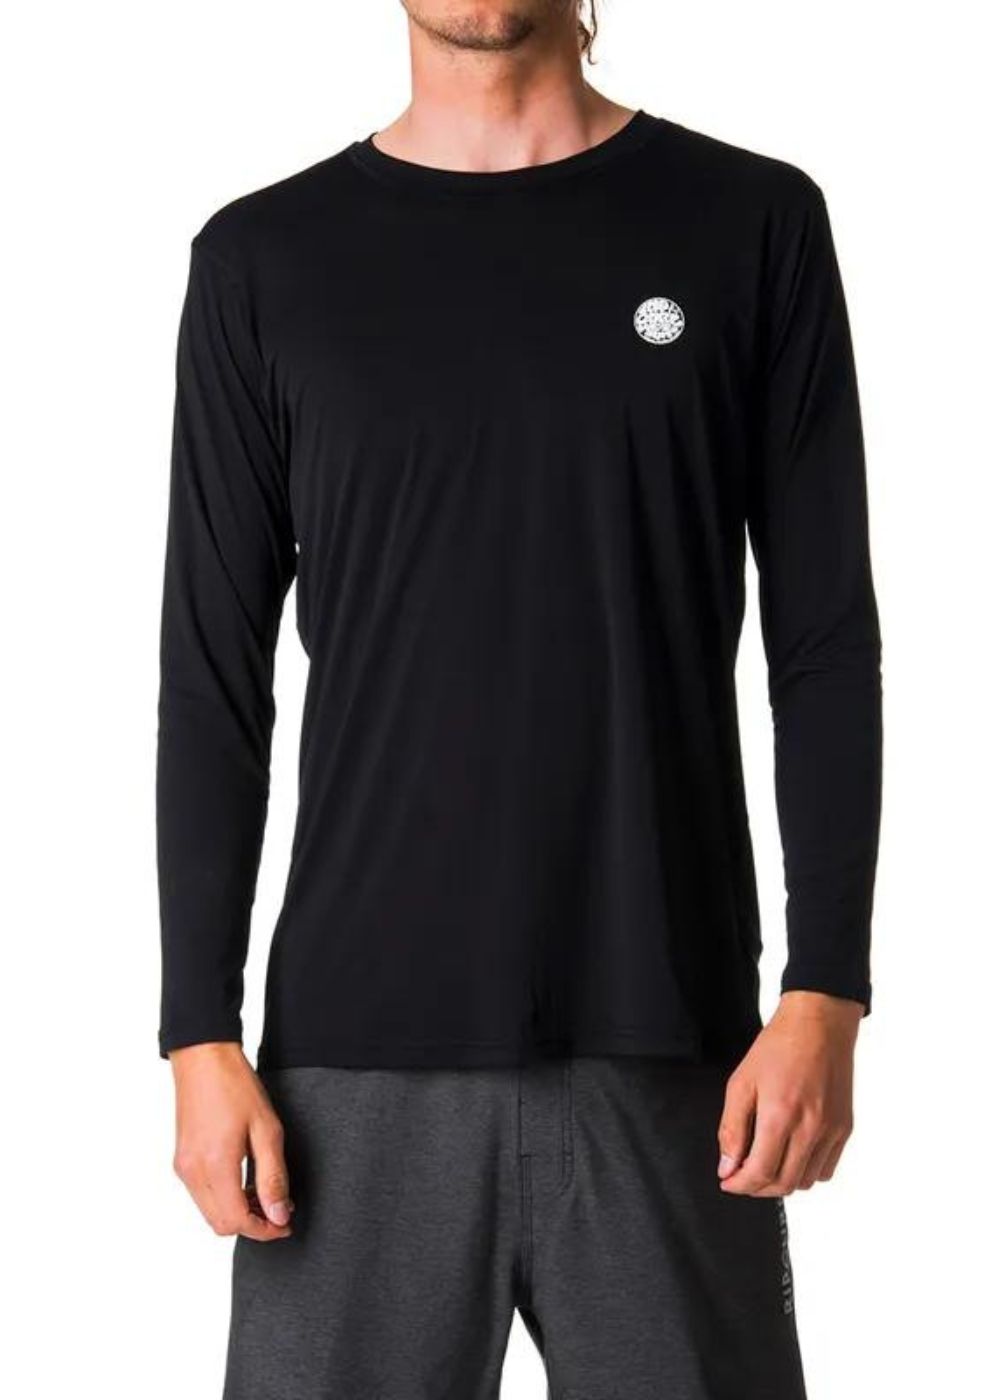 Search Surflite Long Sleeve UVT